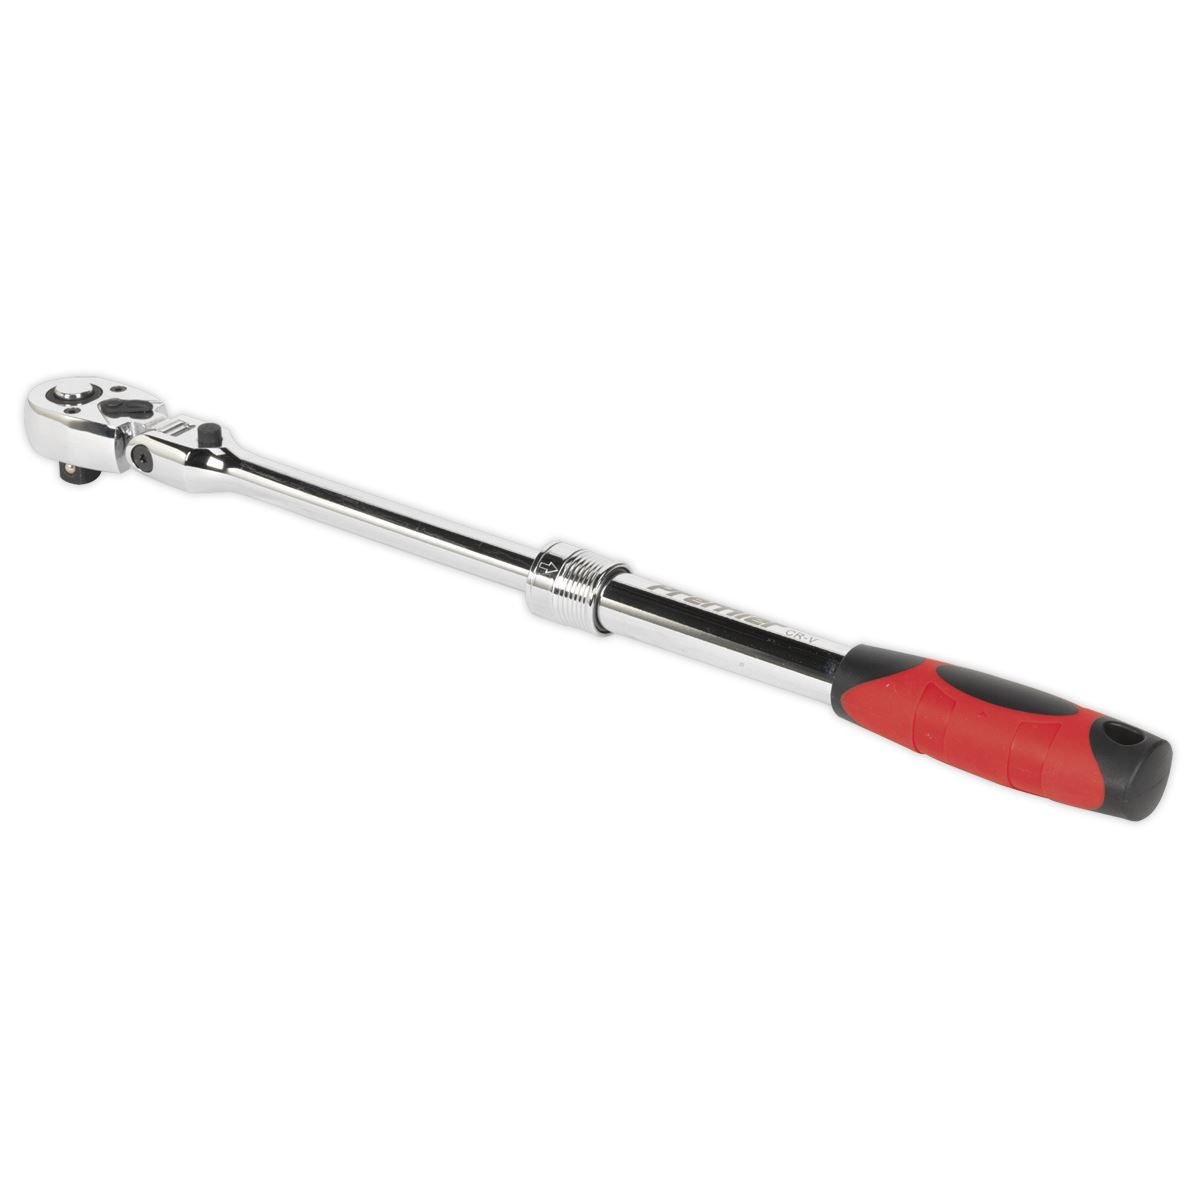 Sealey 1/2" Flexi-Head Extendable Ratchet Handle Socket Wrench 72 Tooth